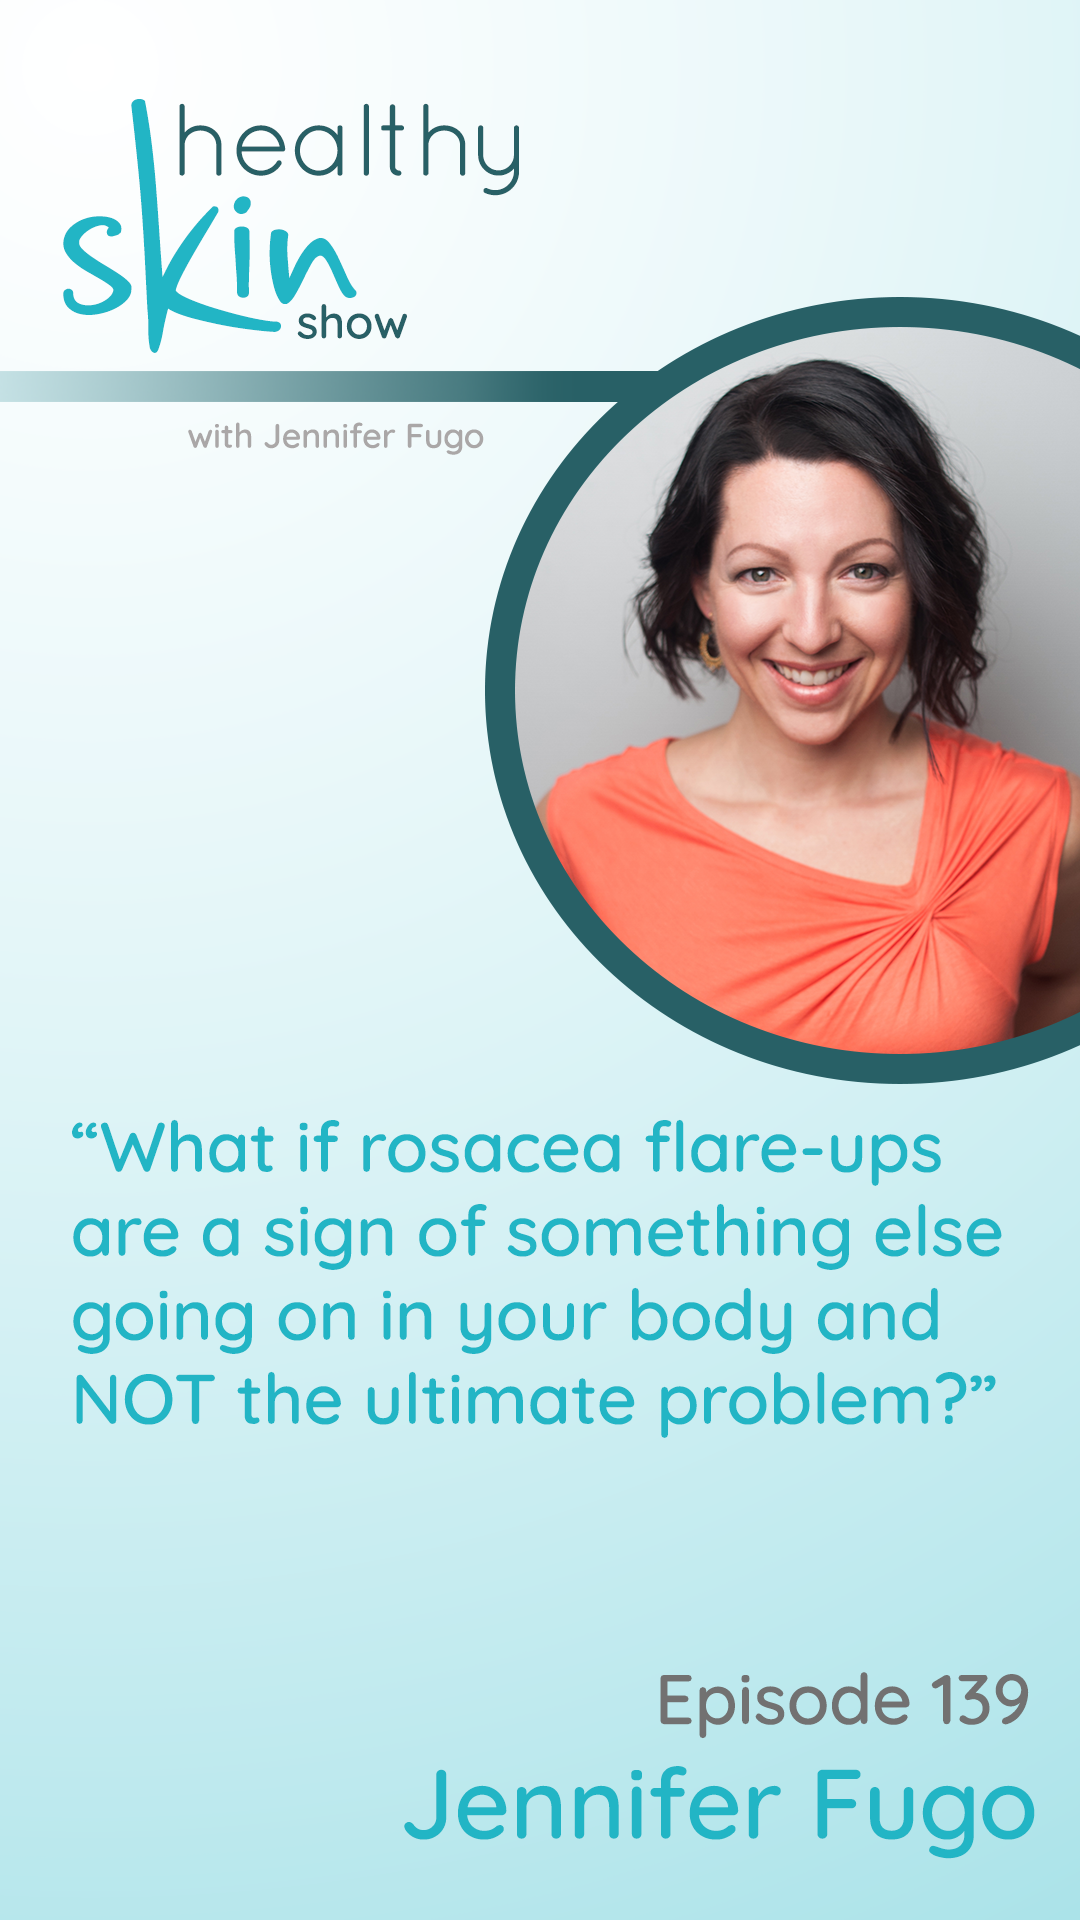 What if rosacea flare-ups are a sign of something else going on in your body and NOT the ultimate problem?